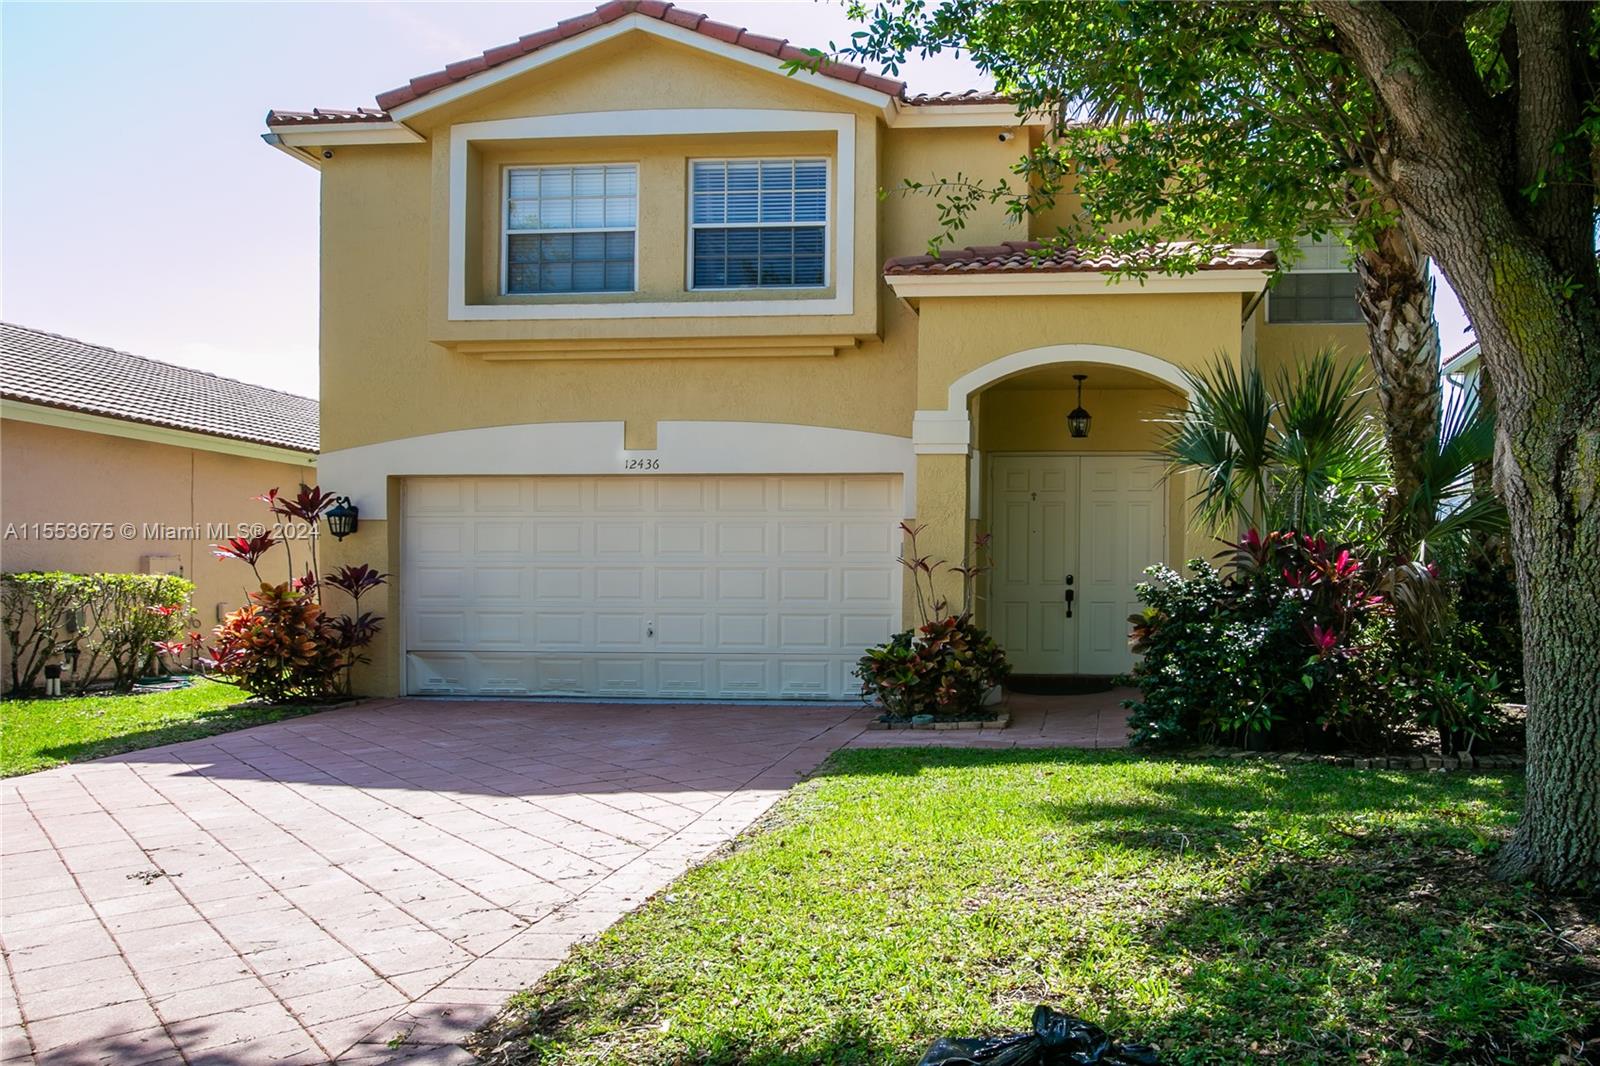 12436 Nw 53rd St St, Coral Springs, Broward County, Florida - 4 Bedrooms  
3 Bathrooms - 